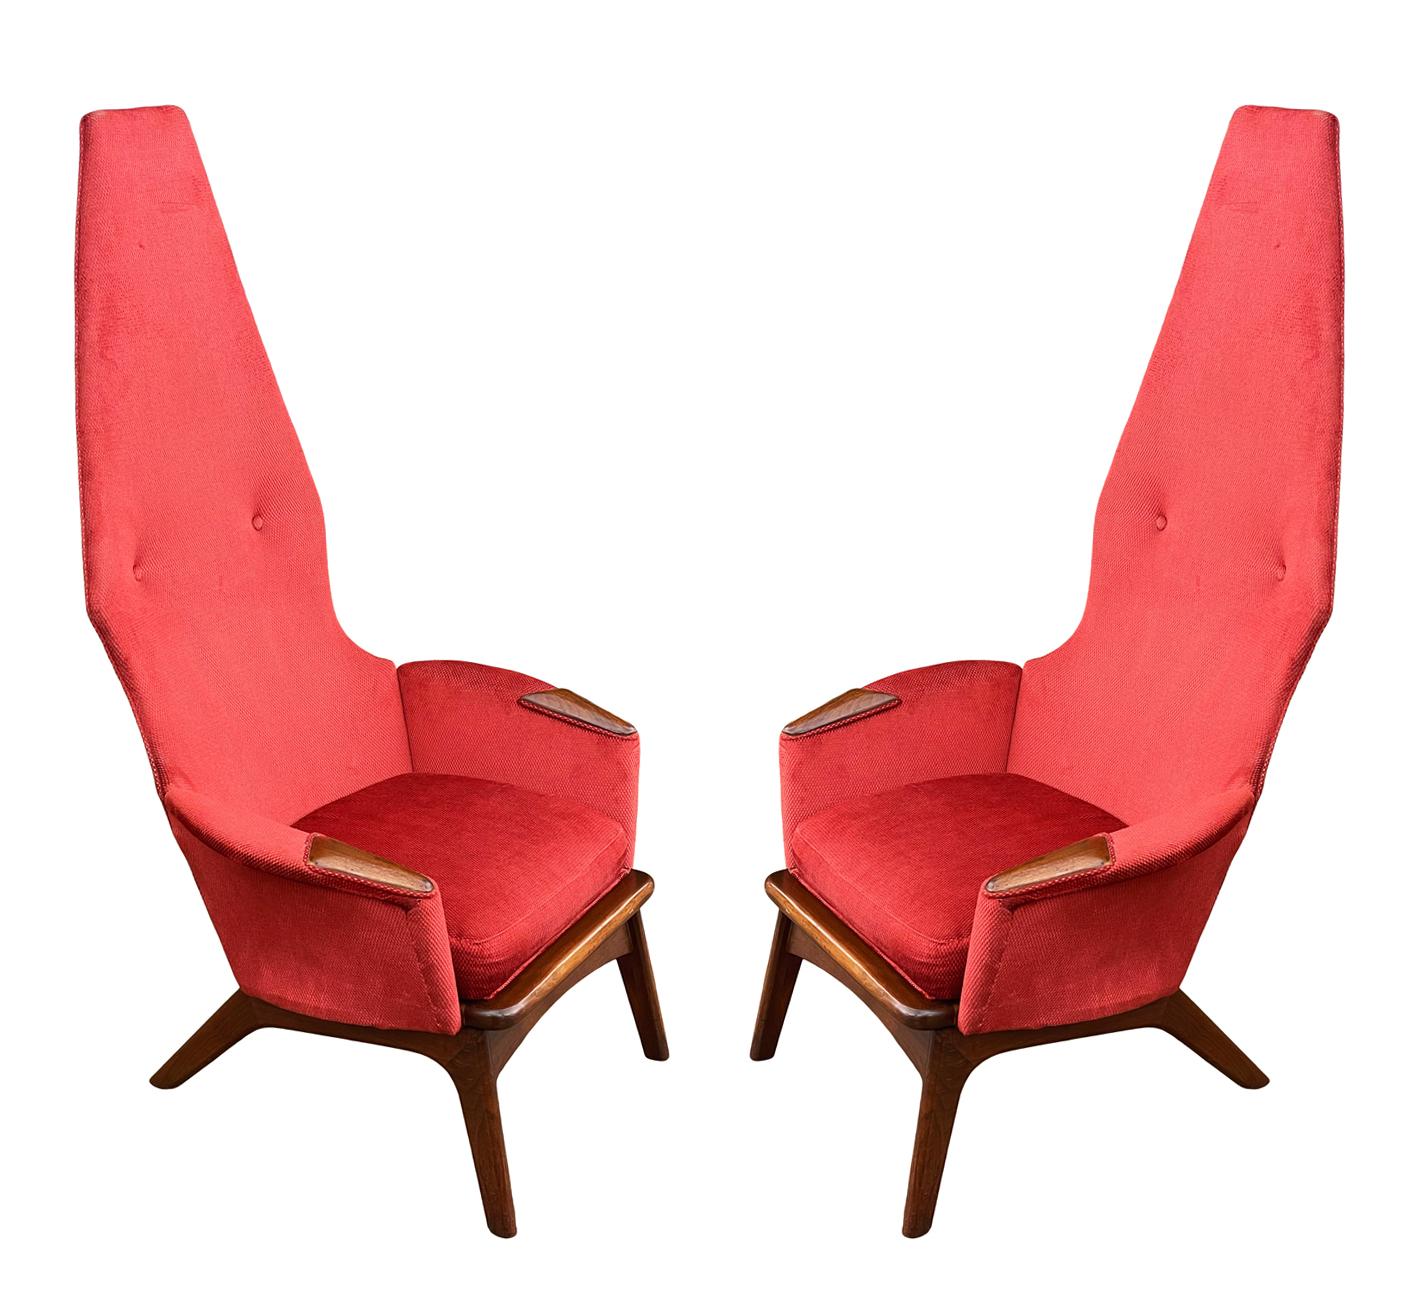 Pair Mid-Century Modern Sculptural High Back Lounge Chairs by Adrian Pearsall In Good Condition For Sale In Philadelphia, PA